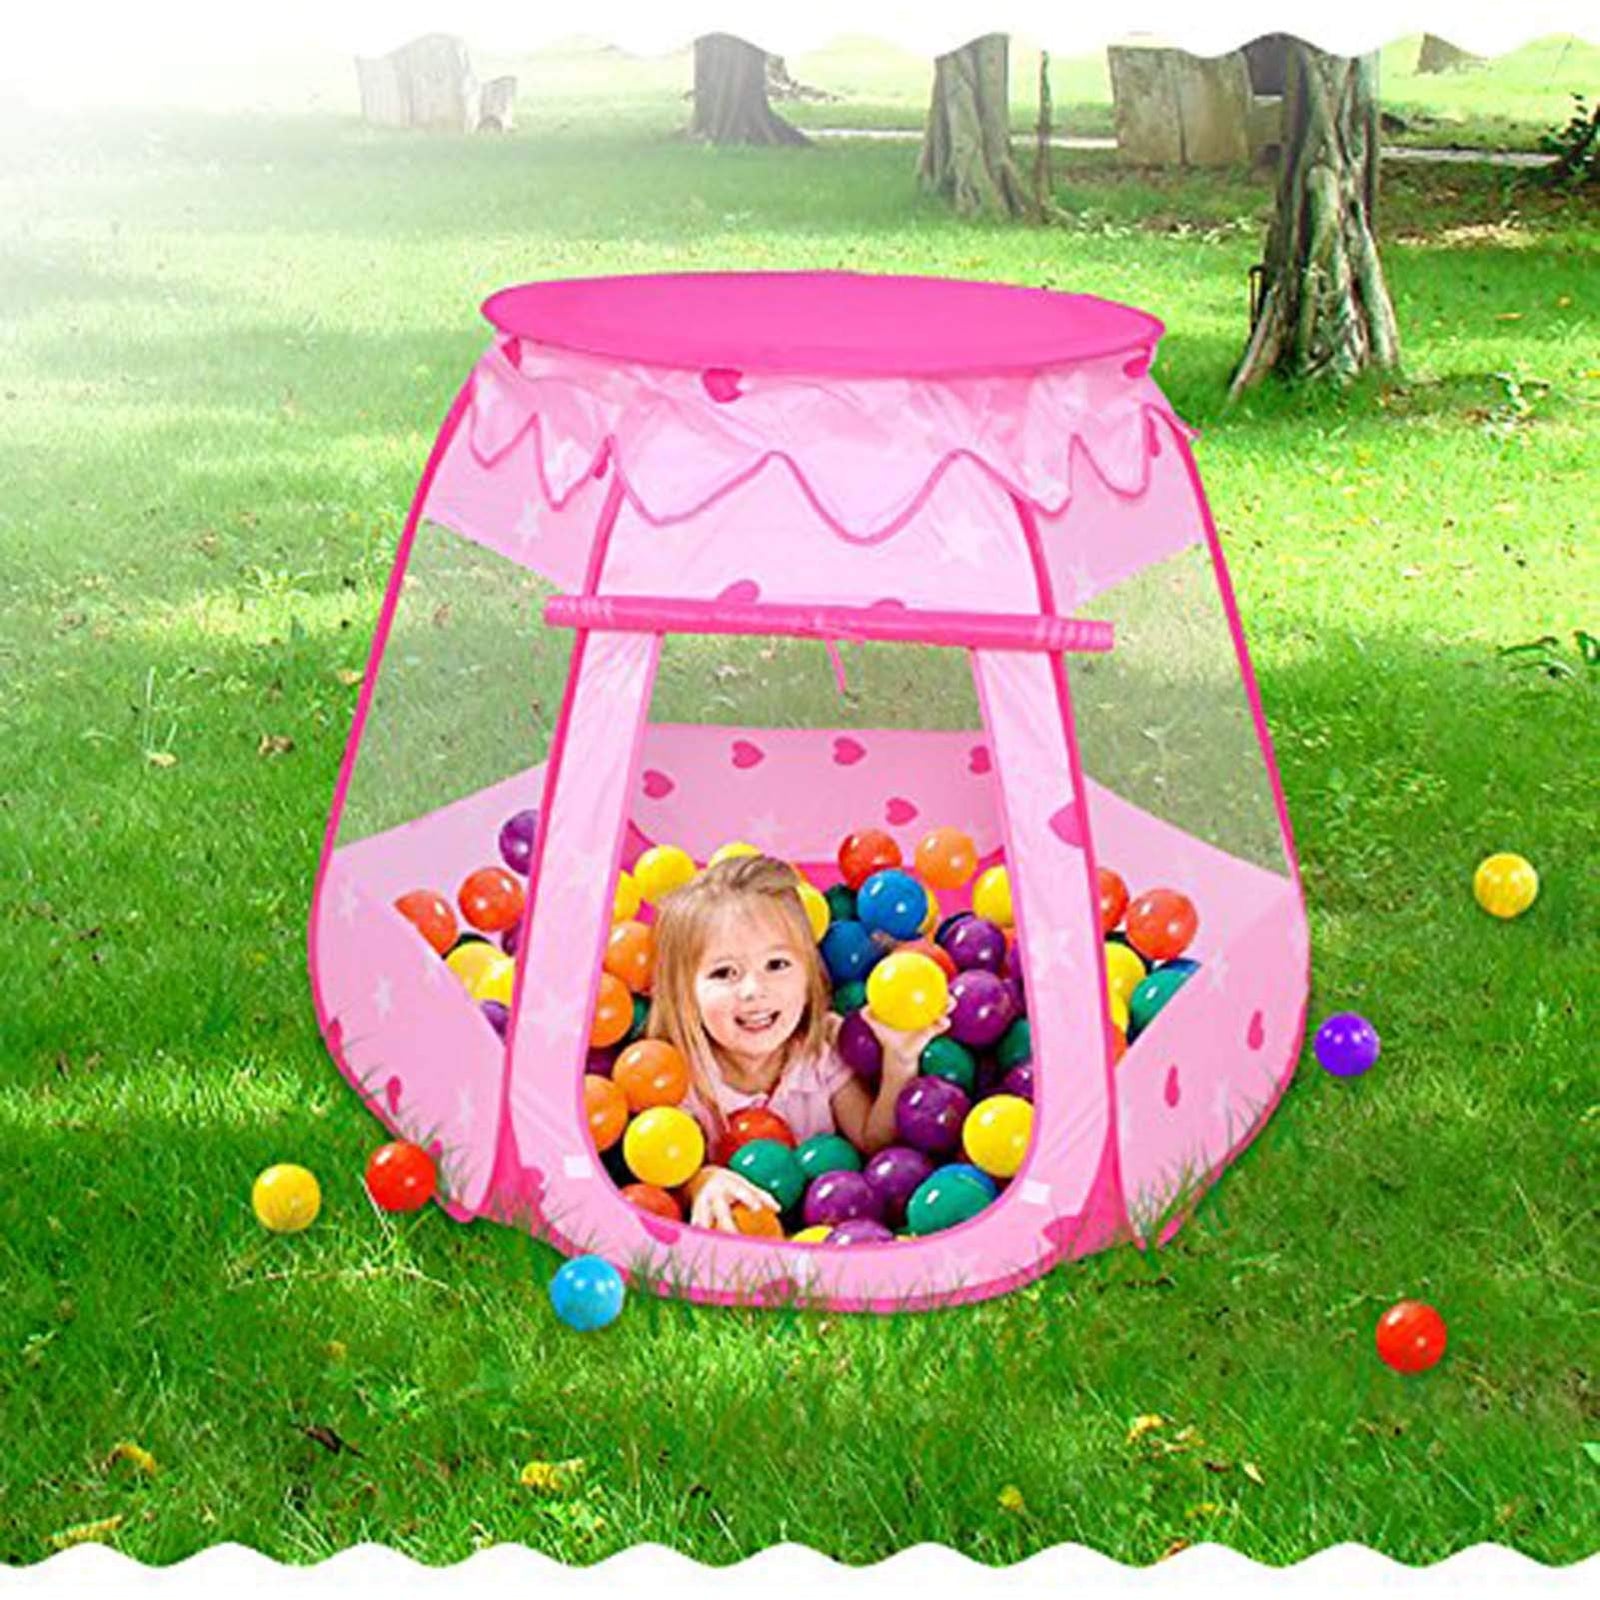 Le Papillon Pink Princess Tent Kids Ball Pit 1st Gift Toddler Girl Easy Pop Up Fold into a Carrying Case Play Tent Indoor & Outdoor Use.(Balls Not Included)